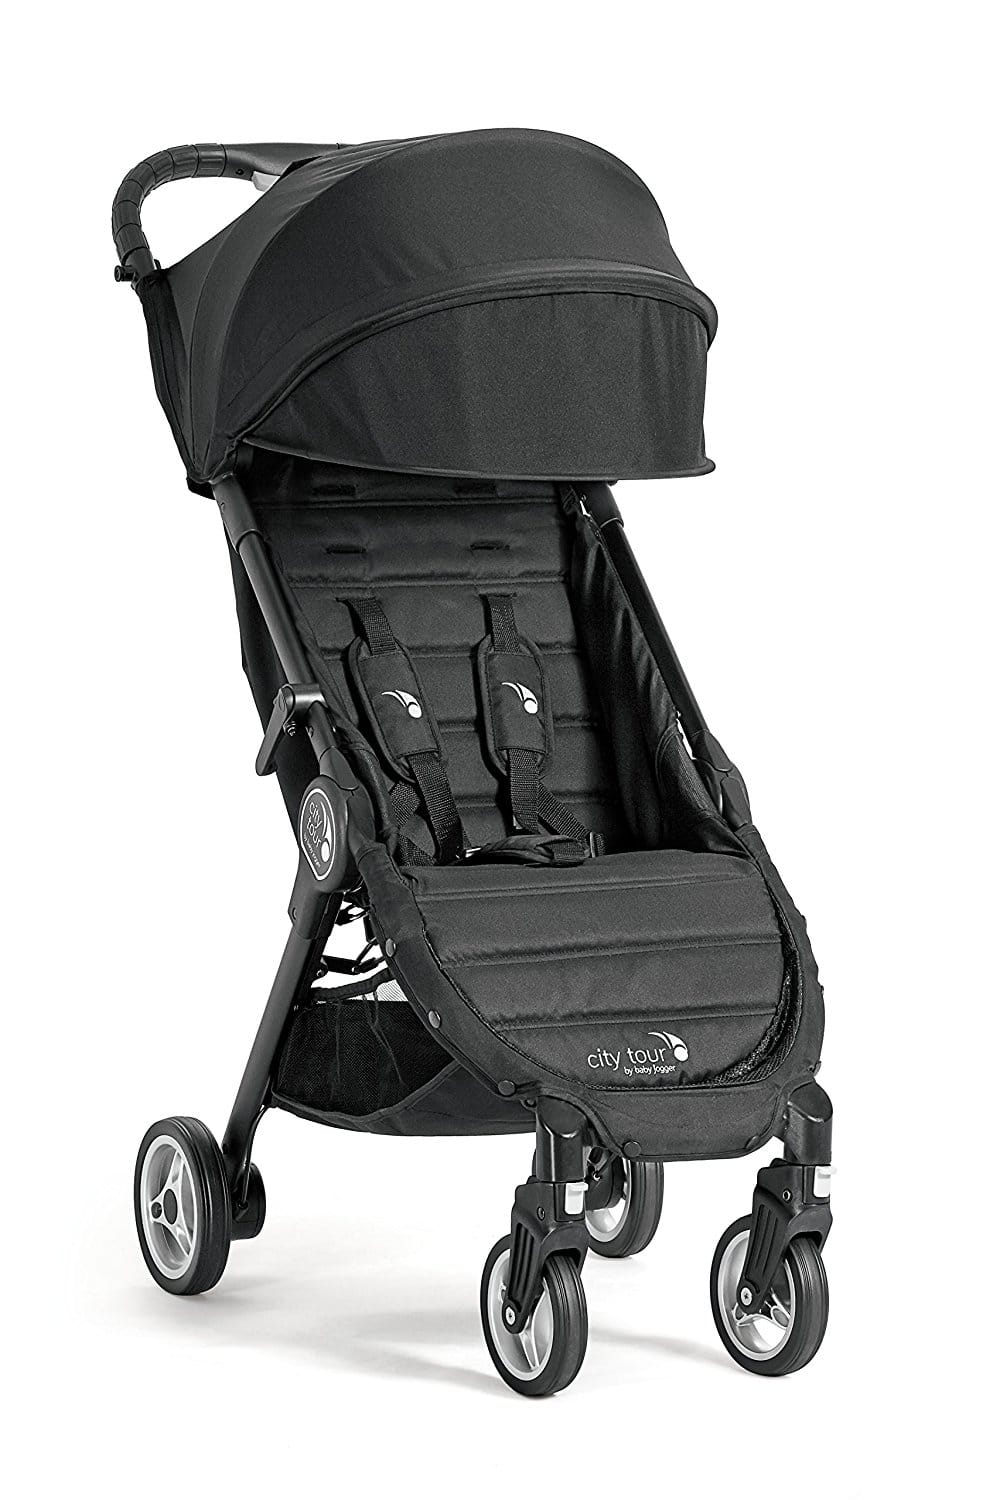 most compact stroller